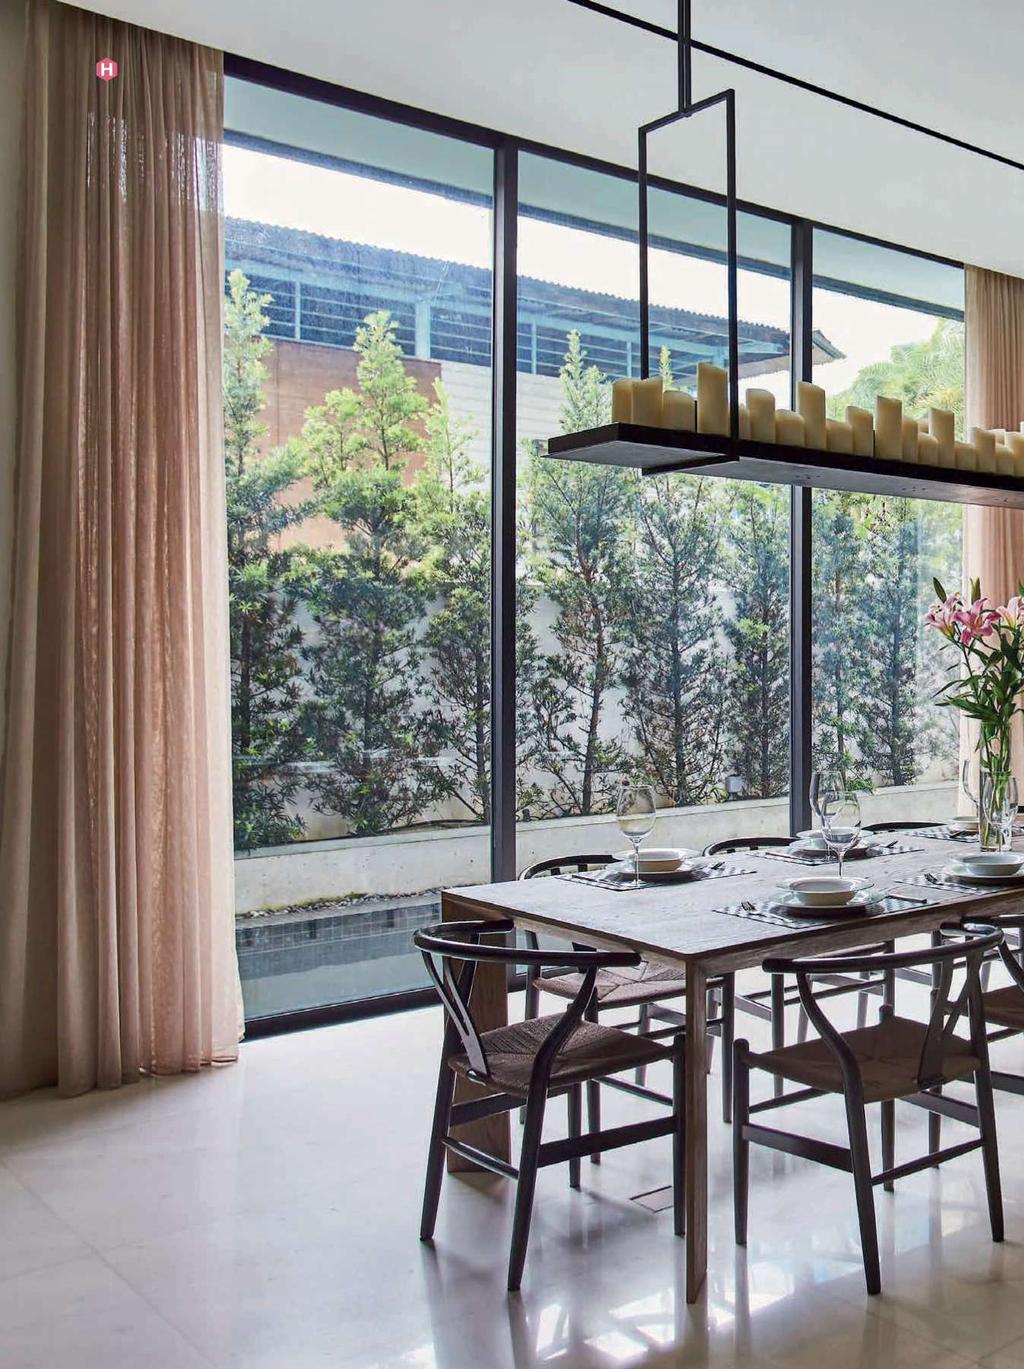 Furnished with fl oor-to-ceiling glass walls and doors, the dining area is a space